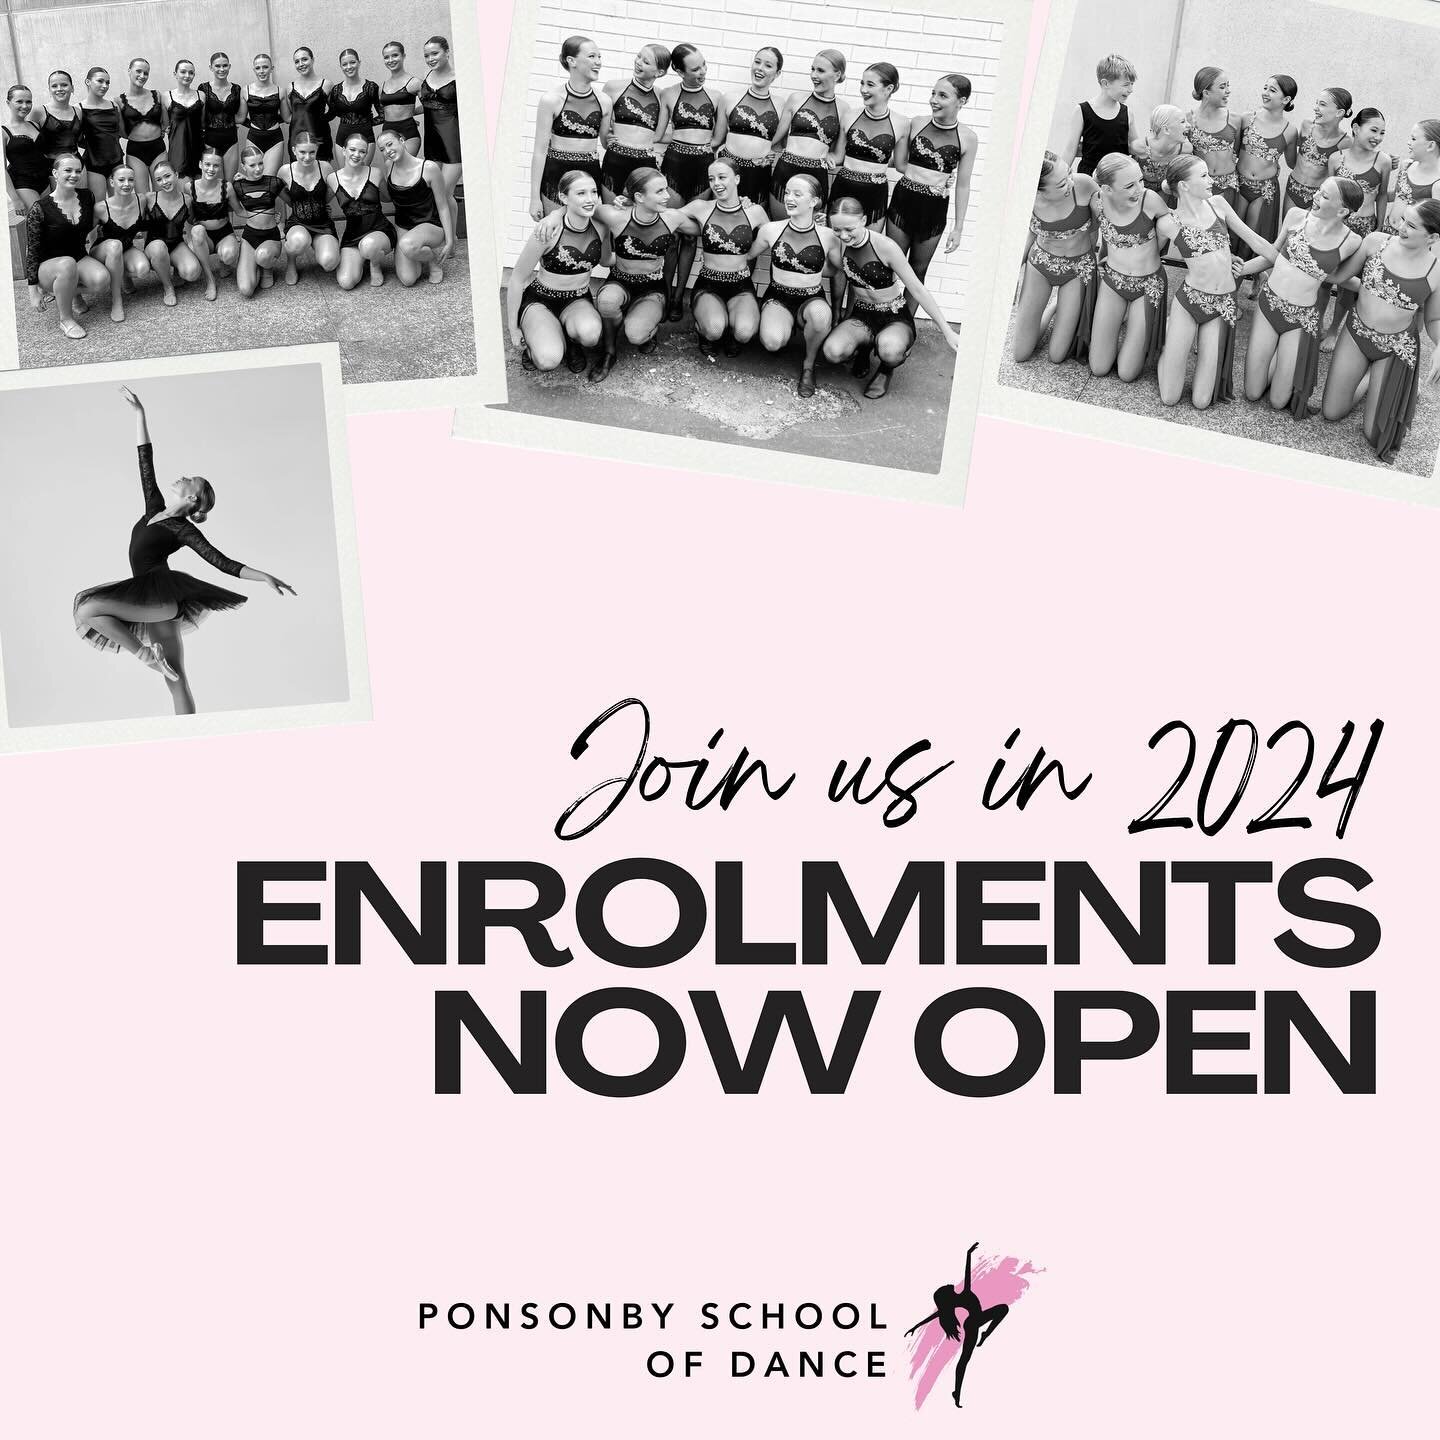 JOIN US IN 2024 💖✨

2024 Class Enrolments are open NOW! Head to the link in our bio to view the 2024 timetable and enrol via the parent portal!

If you have any questions, email tracey@ponsonbyschoolofdance.co.nz 📧

Come and dance with us! 💝